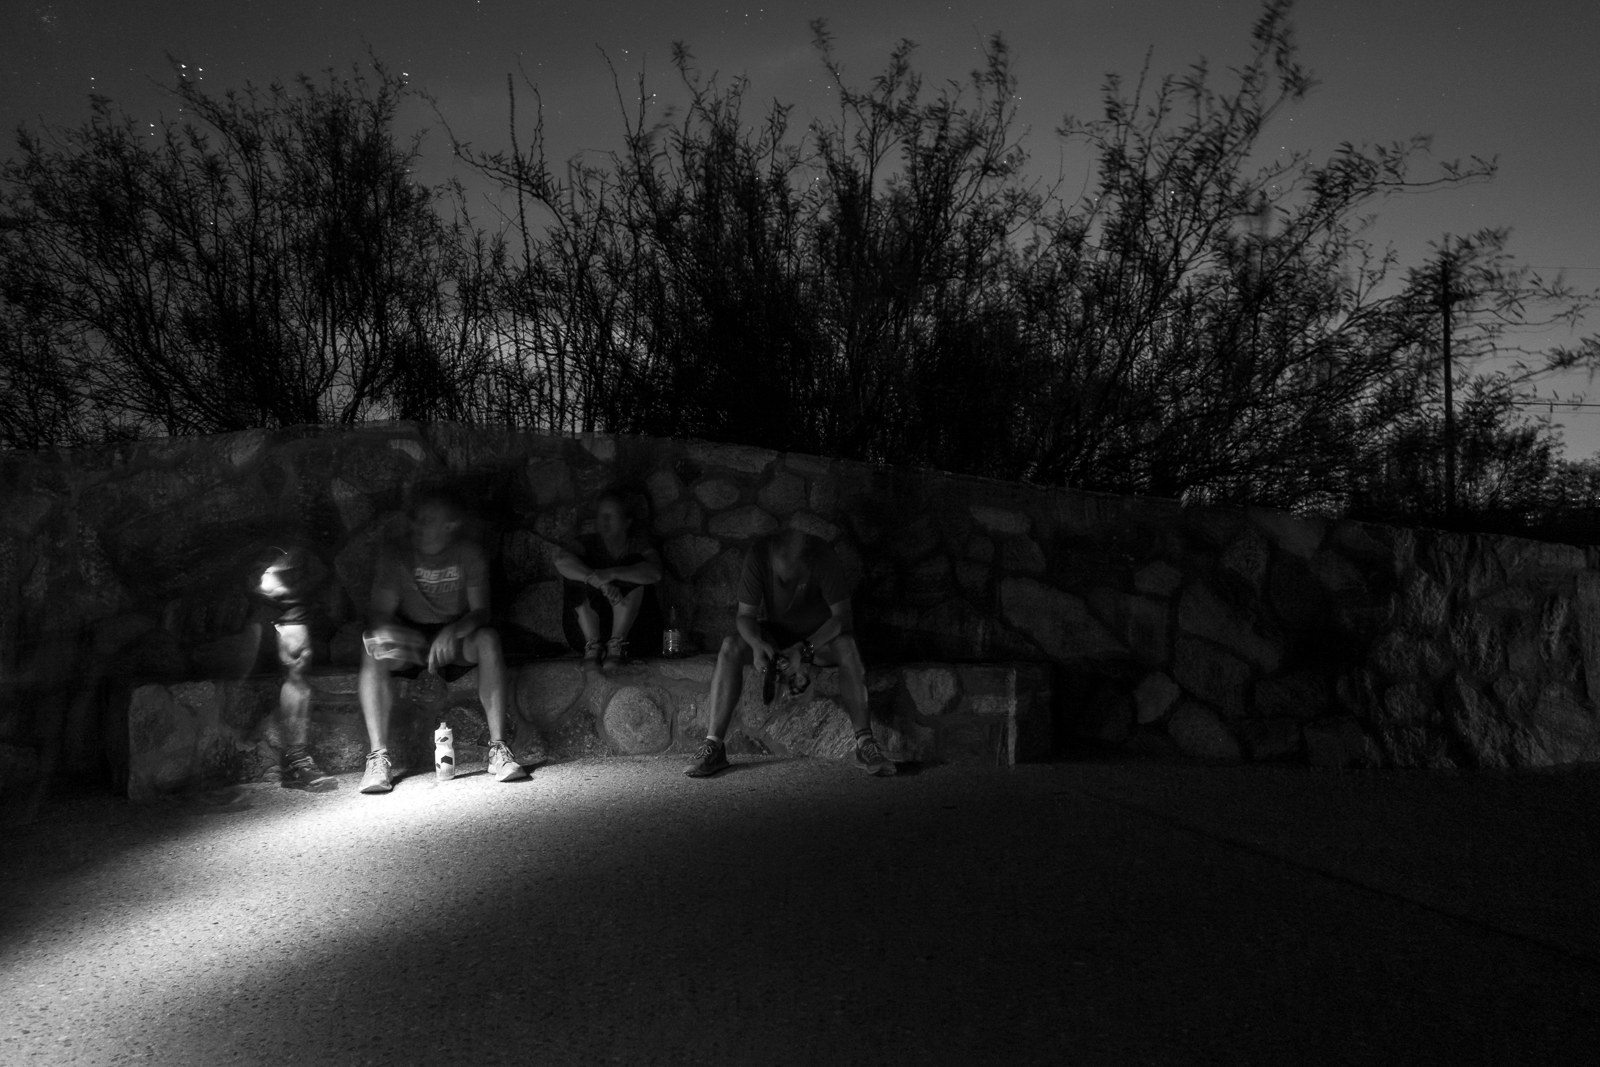 Sitting in the dark at the finish - near the Sabino Canyon Parking Area. July 2015.